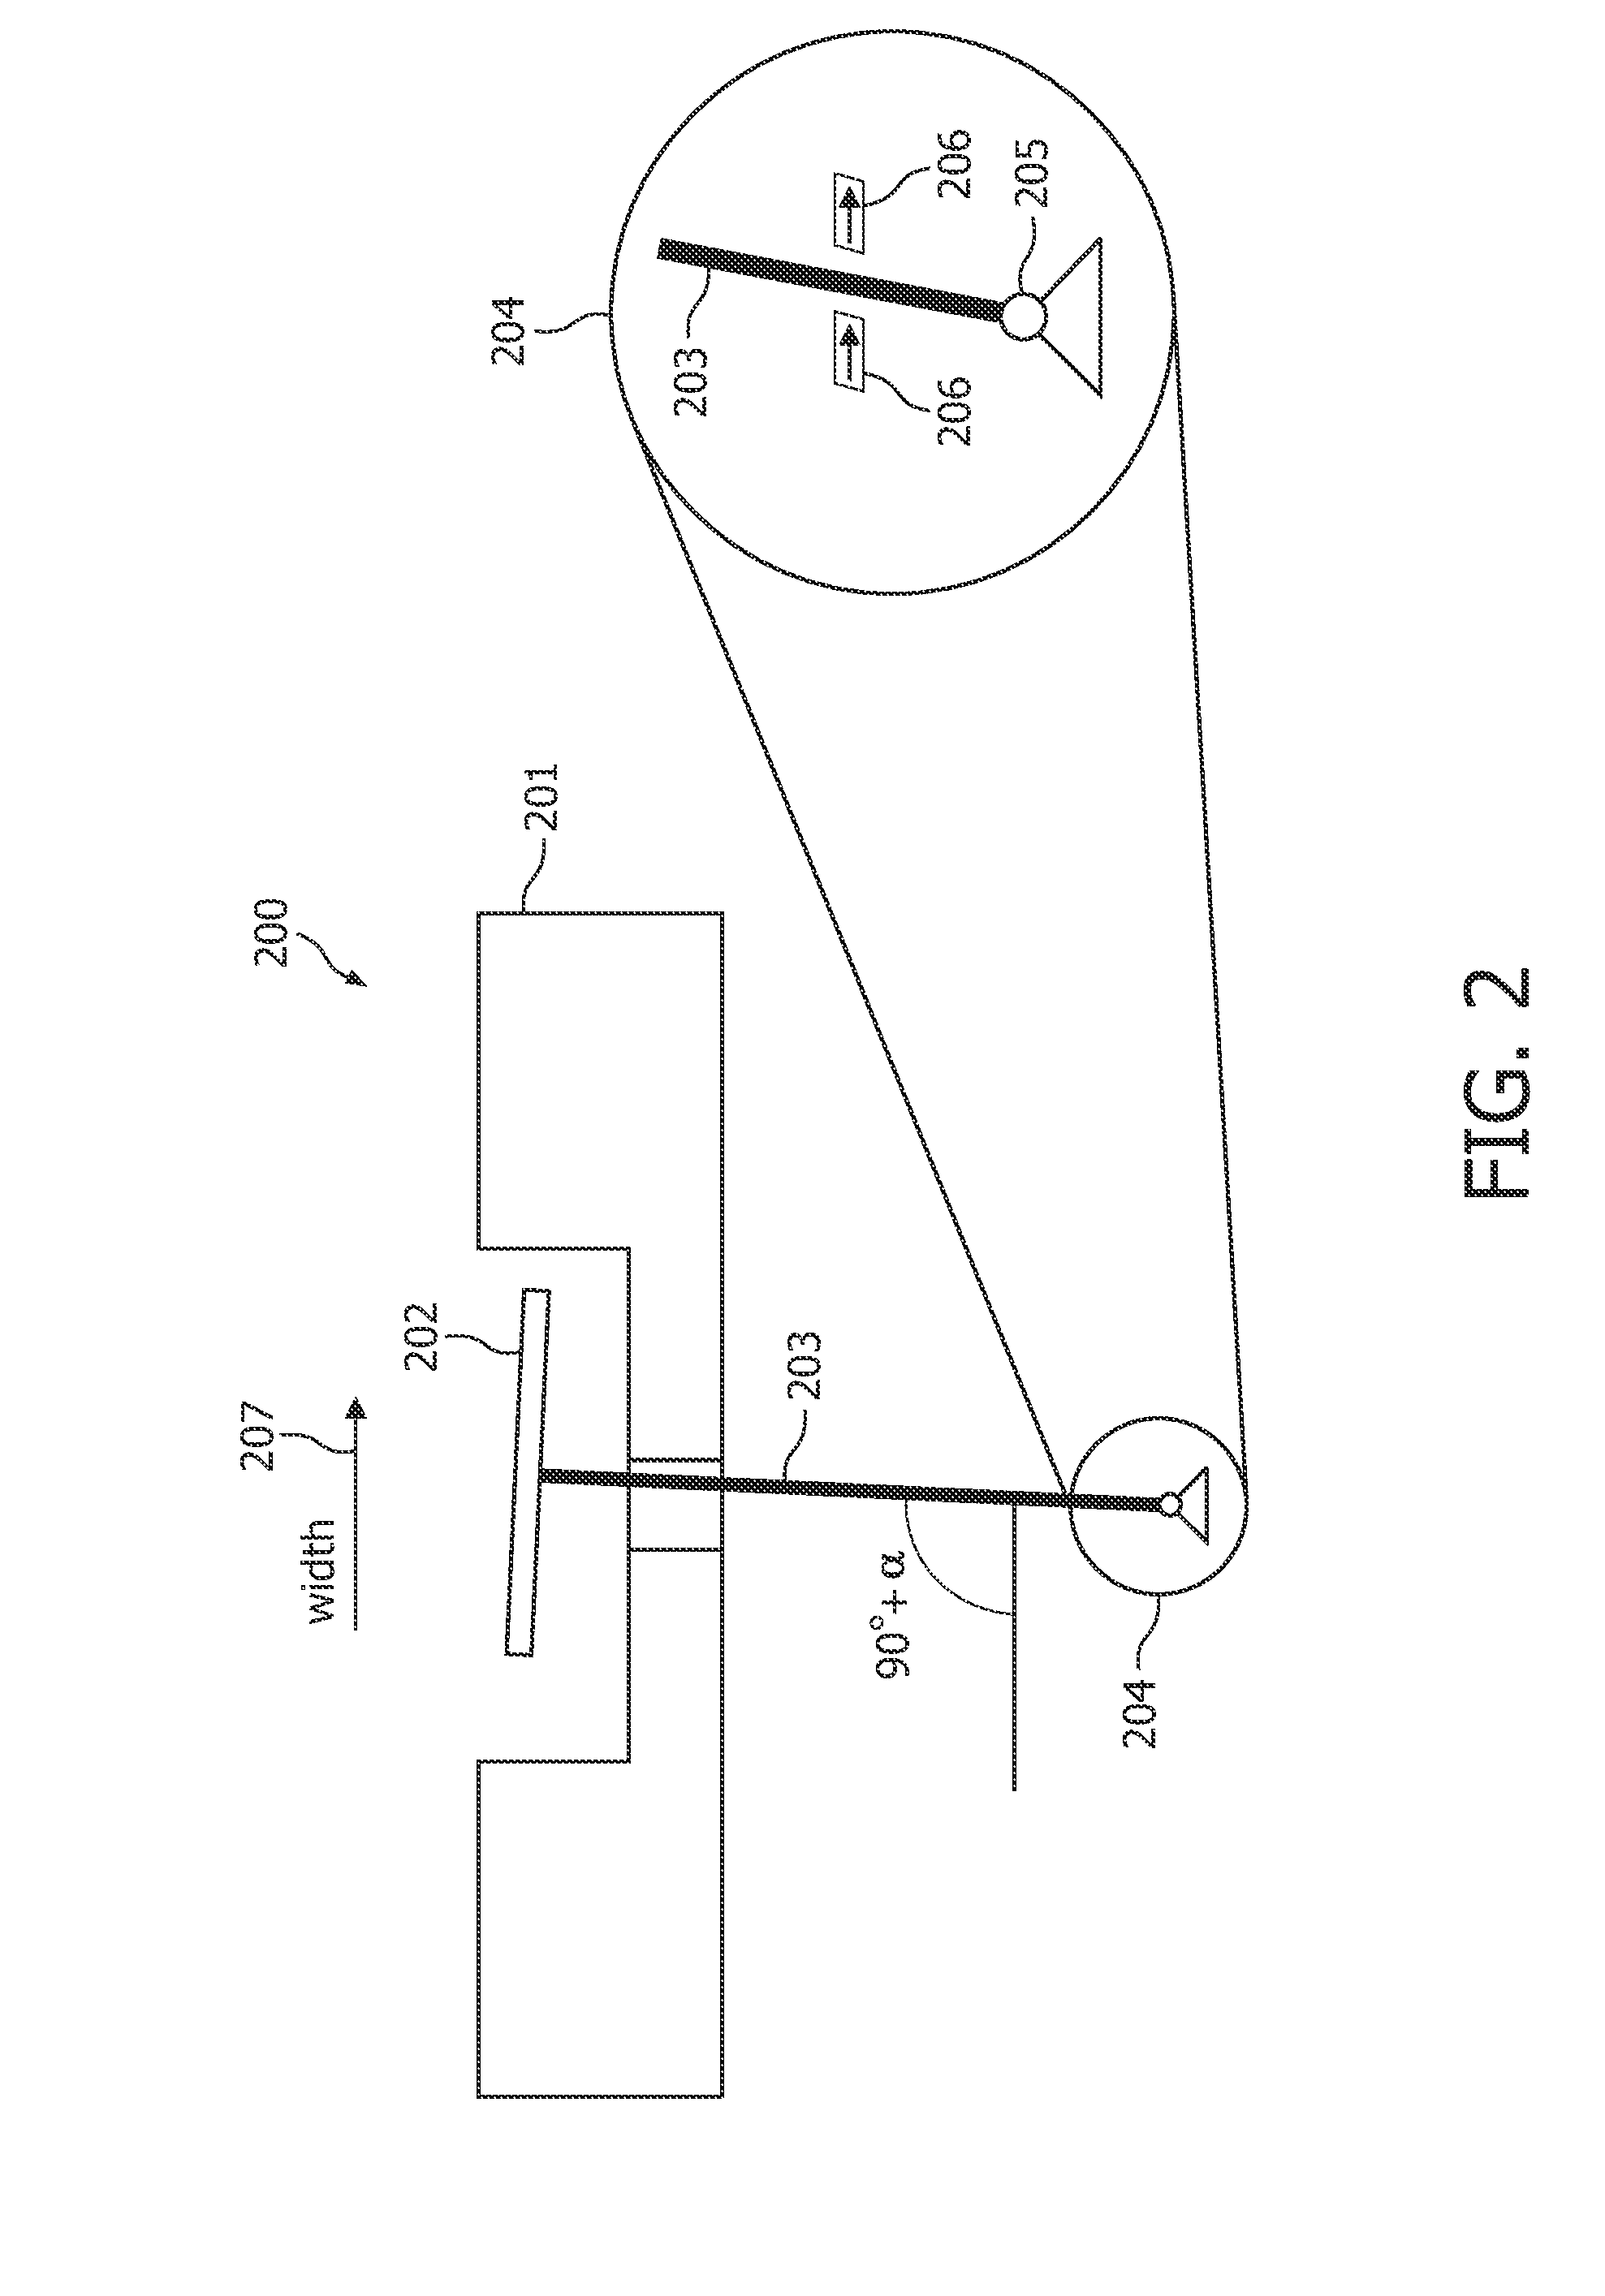 X-ray tube, x-ray system, and method for generating x-rays